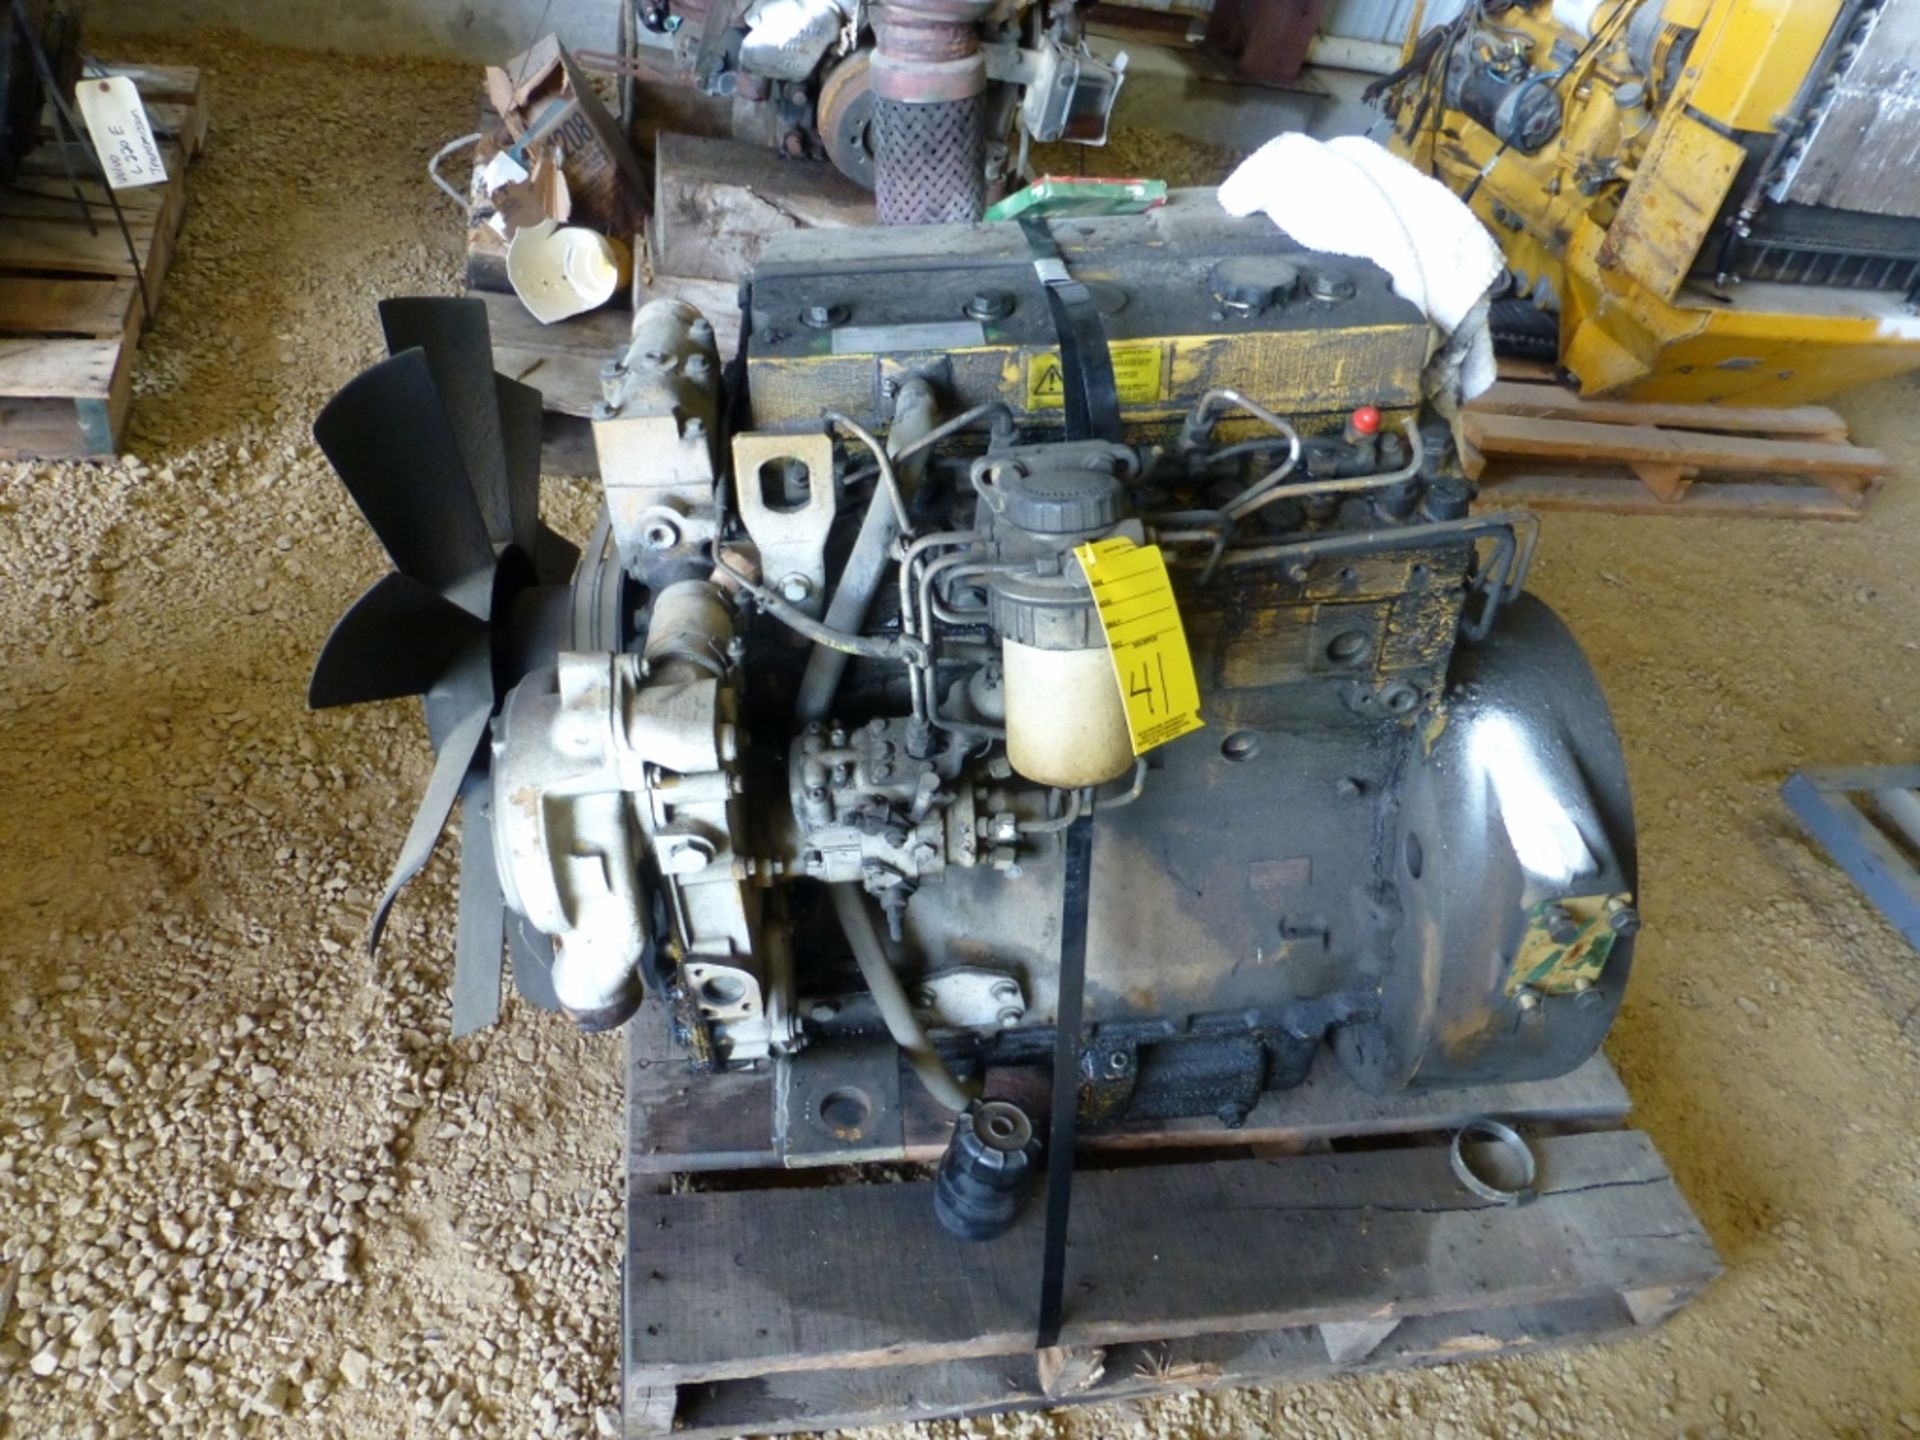 Caterpillar 106Hp, 4 cyl diesel engine. SE: 5hk08070, unknown running condition - Image 7 of 9